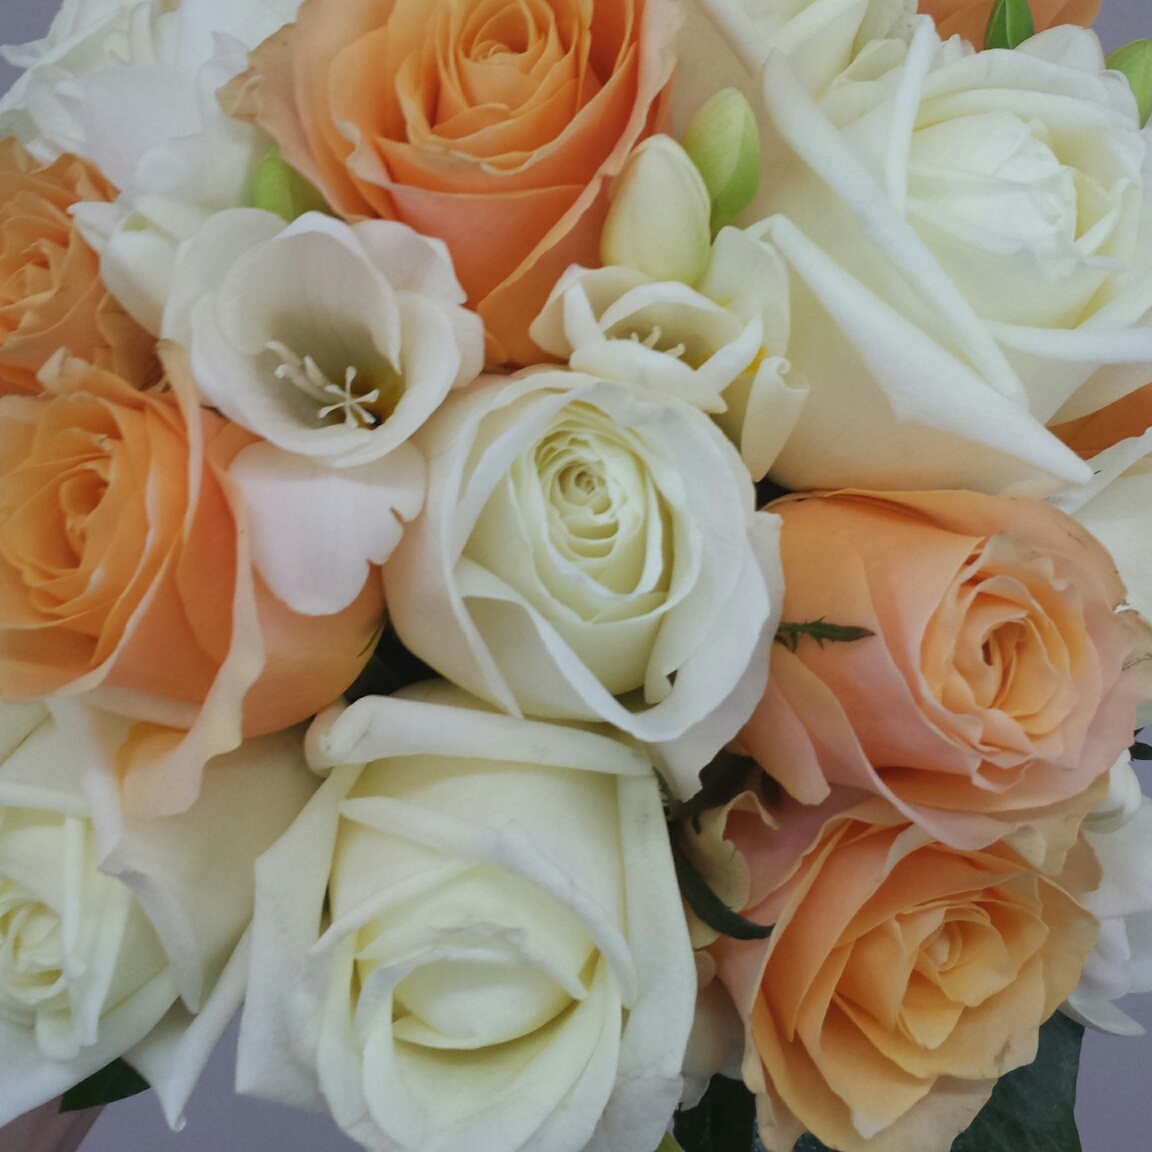 apricot and white roses with freesia